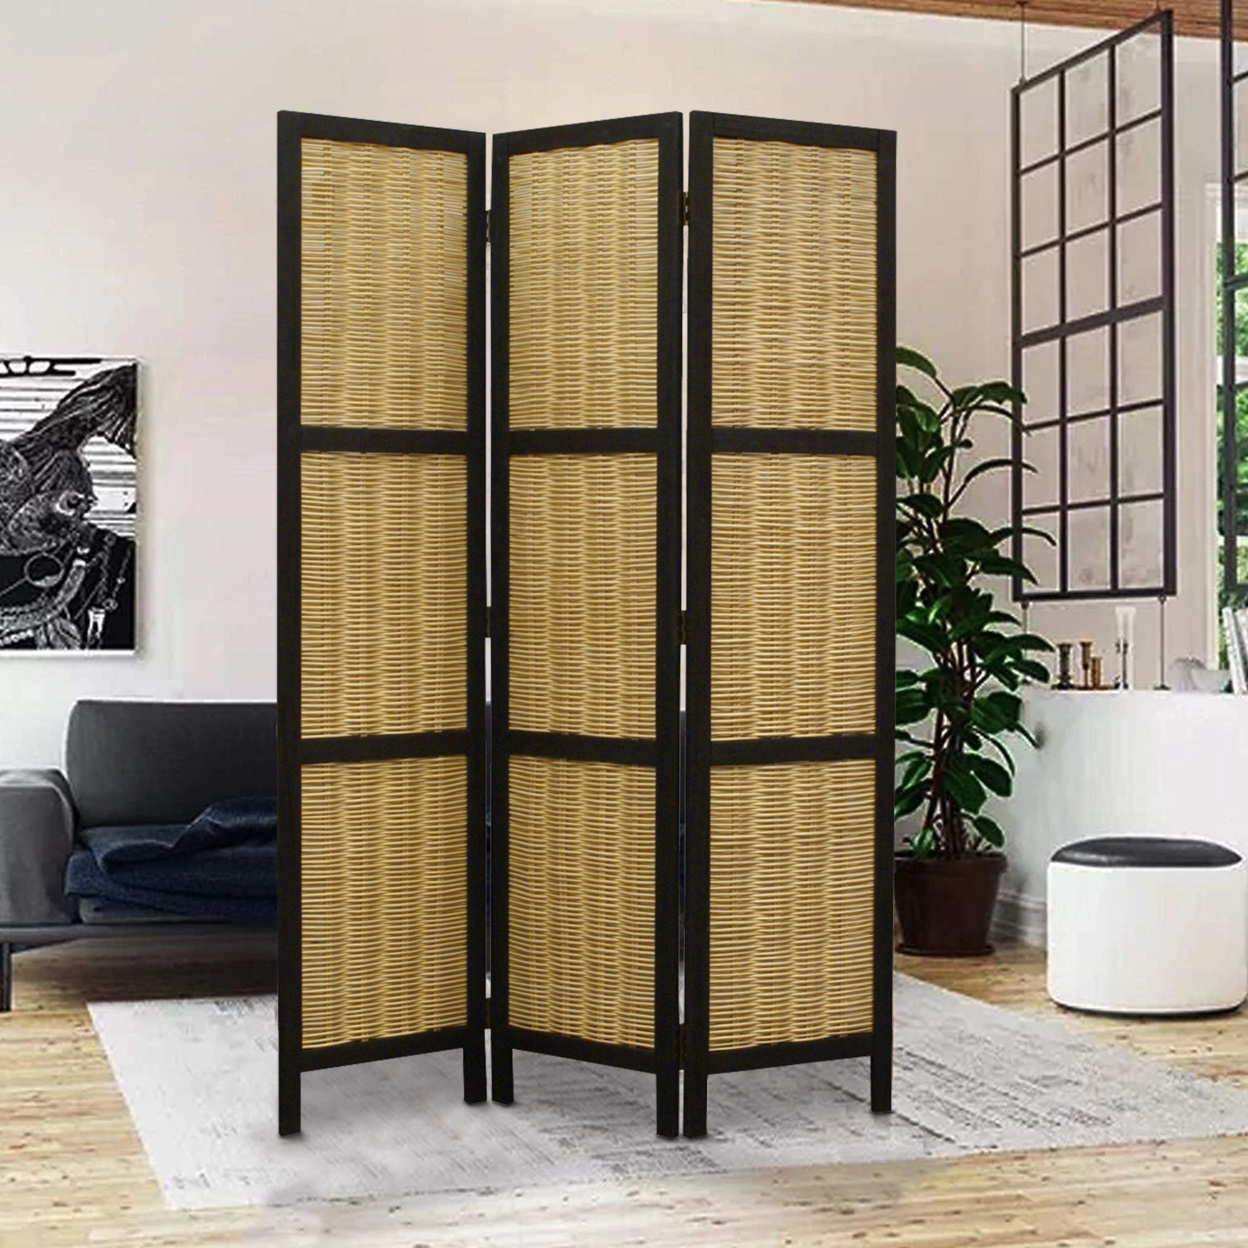 Cottage Style 3 Panel Room Divider With Willow Weaving, Black And Brown- Saltoro Sherpi